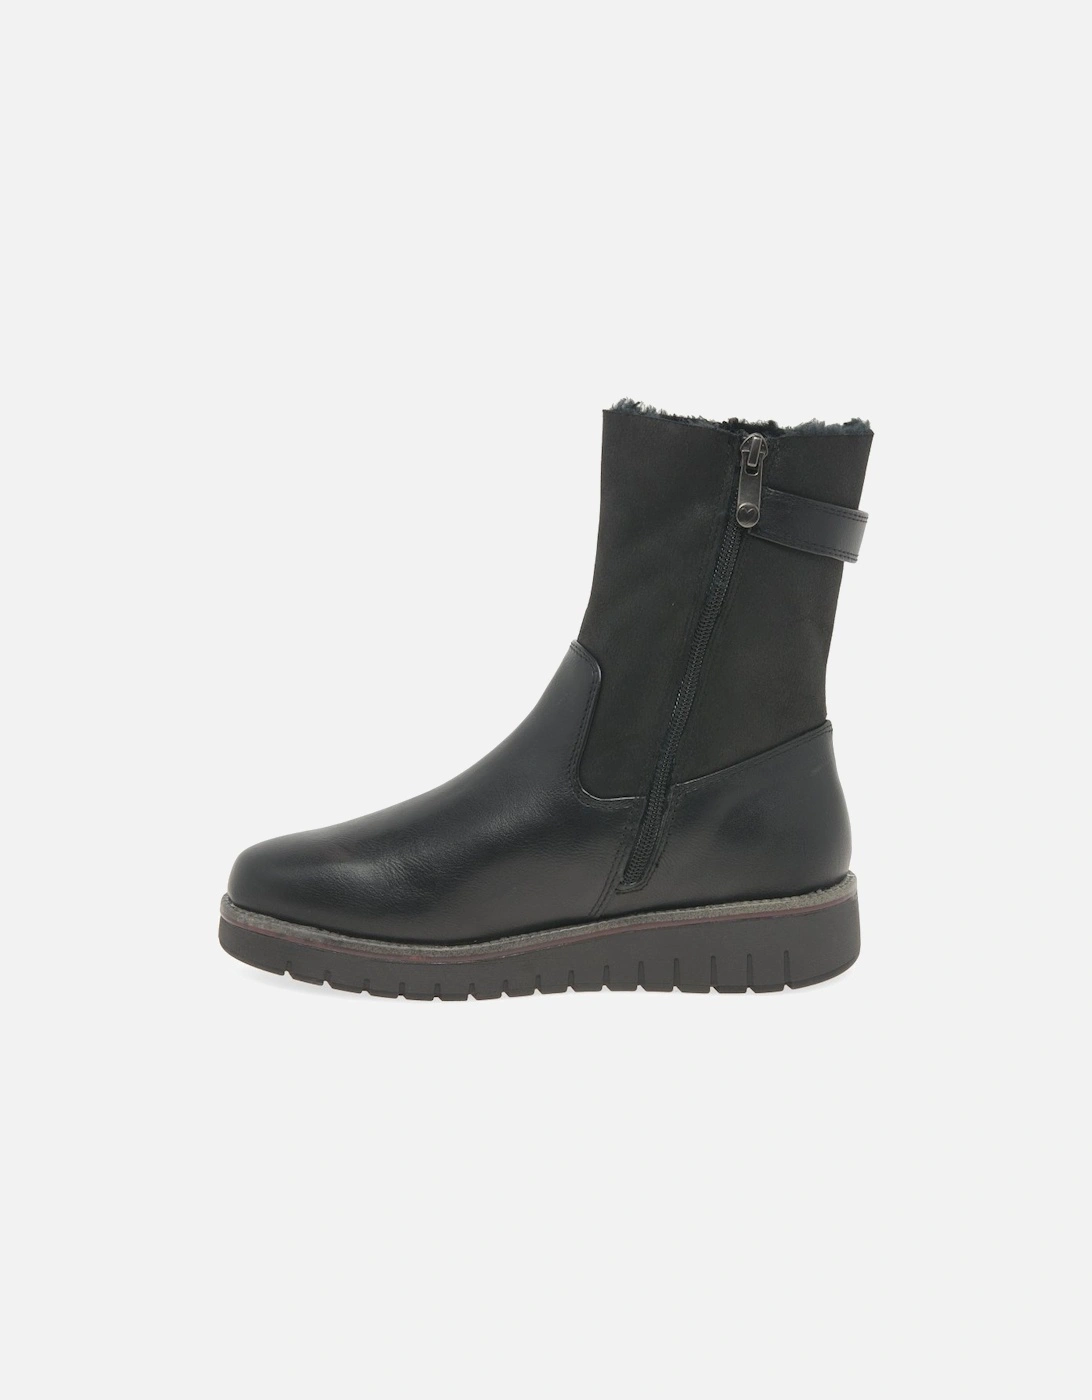 Monica Womens Warm Lined Boots